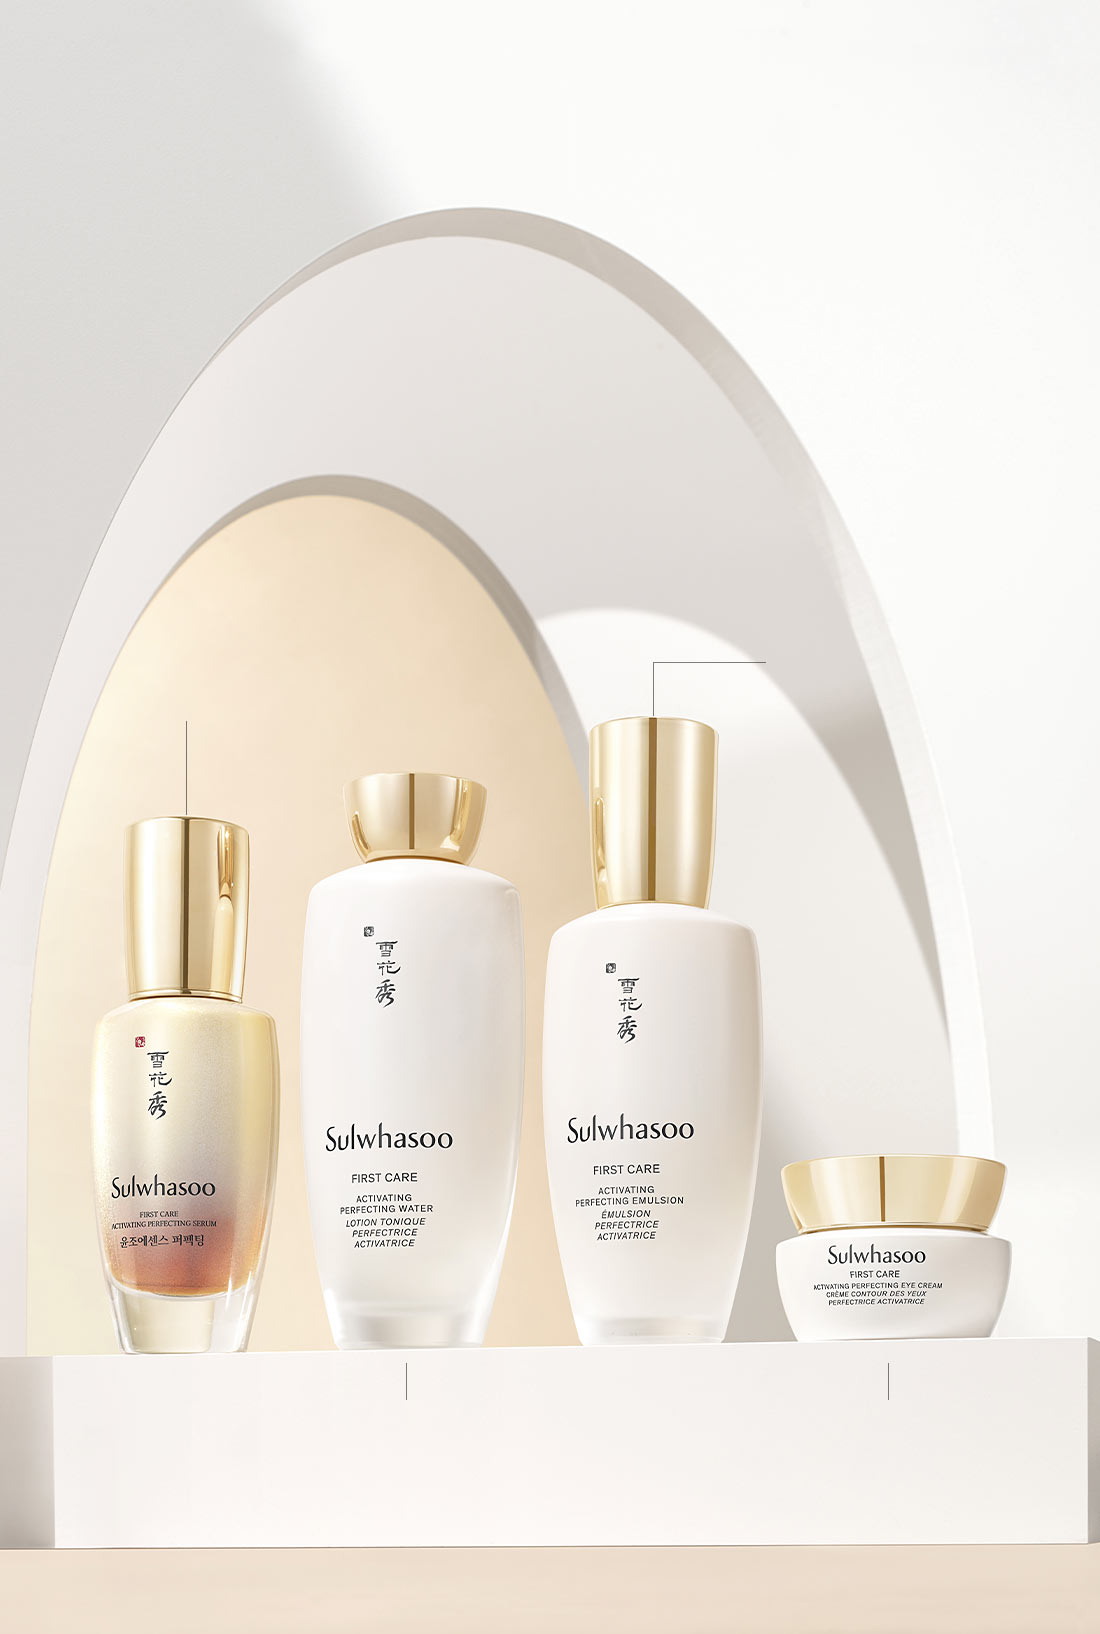 SULWHASOO FIRST CARE ACTIVATING PERFECTING SERUM 윤조에센스 퍼펙팅 / FIRST CARE ACTIVATING PERFECTING WATER LOTION TONIQUE PERFECTRICE ACTIVATIRICE / FIRST CARE ACTIVATING PERFECTING EMULSION EMULSION PERFECTRICE ACTIVATIRICE / FIRST CARE ACTIVATING PERFECTING EYE CREAM CREAM CONTOUR DES YEUX PERFECTRICE ACTIVATIRICE